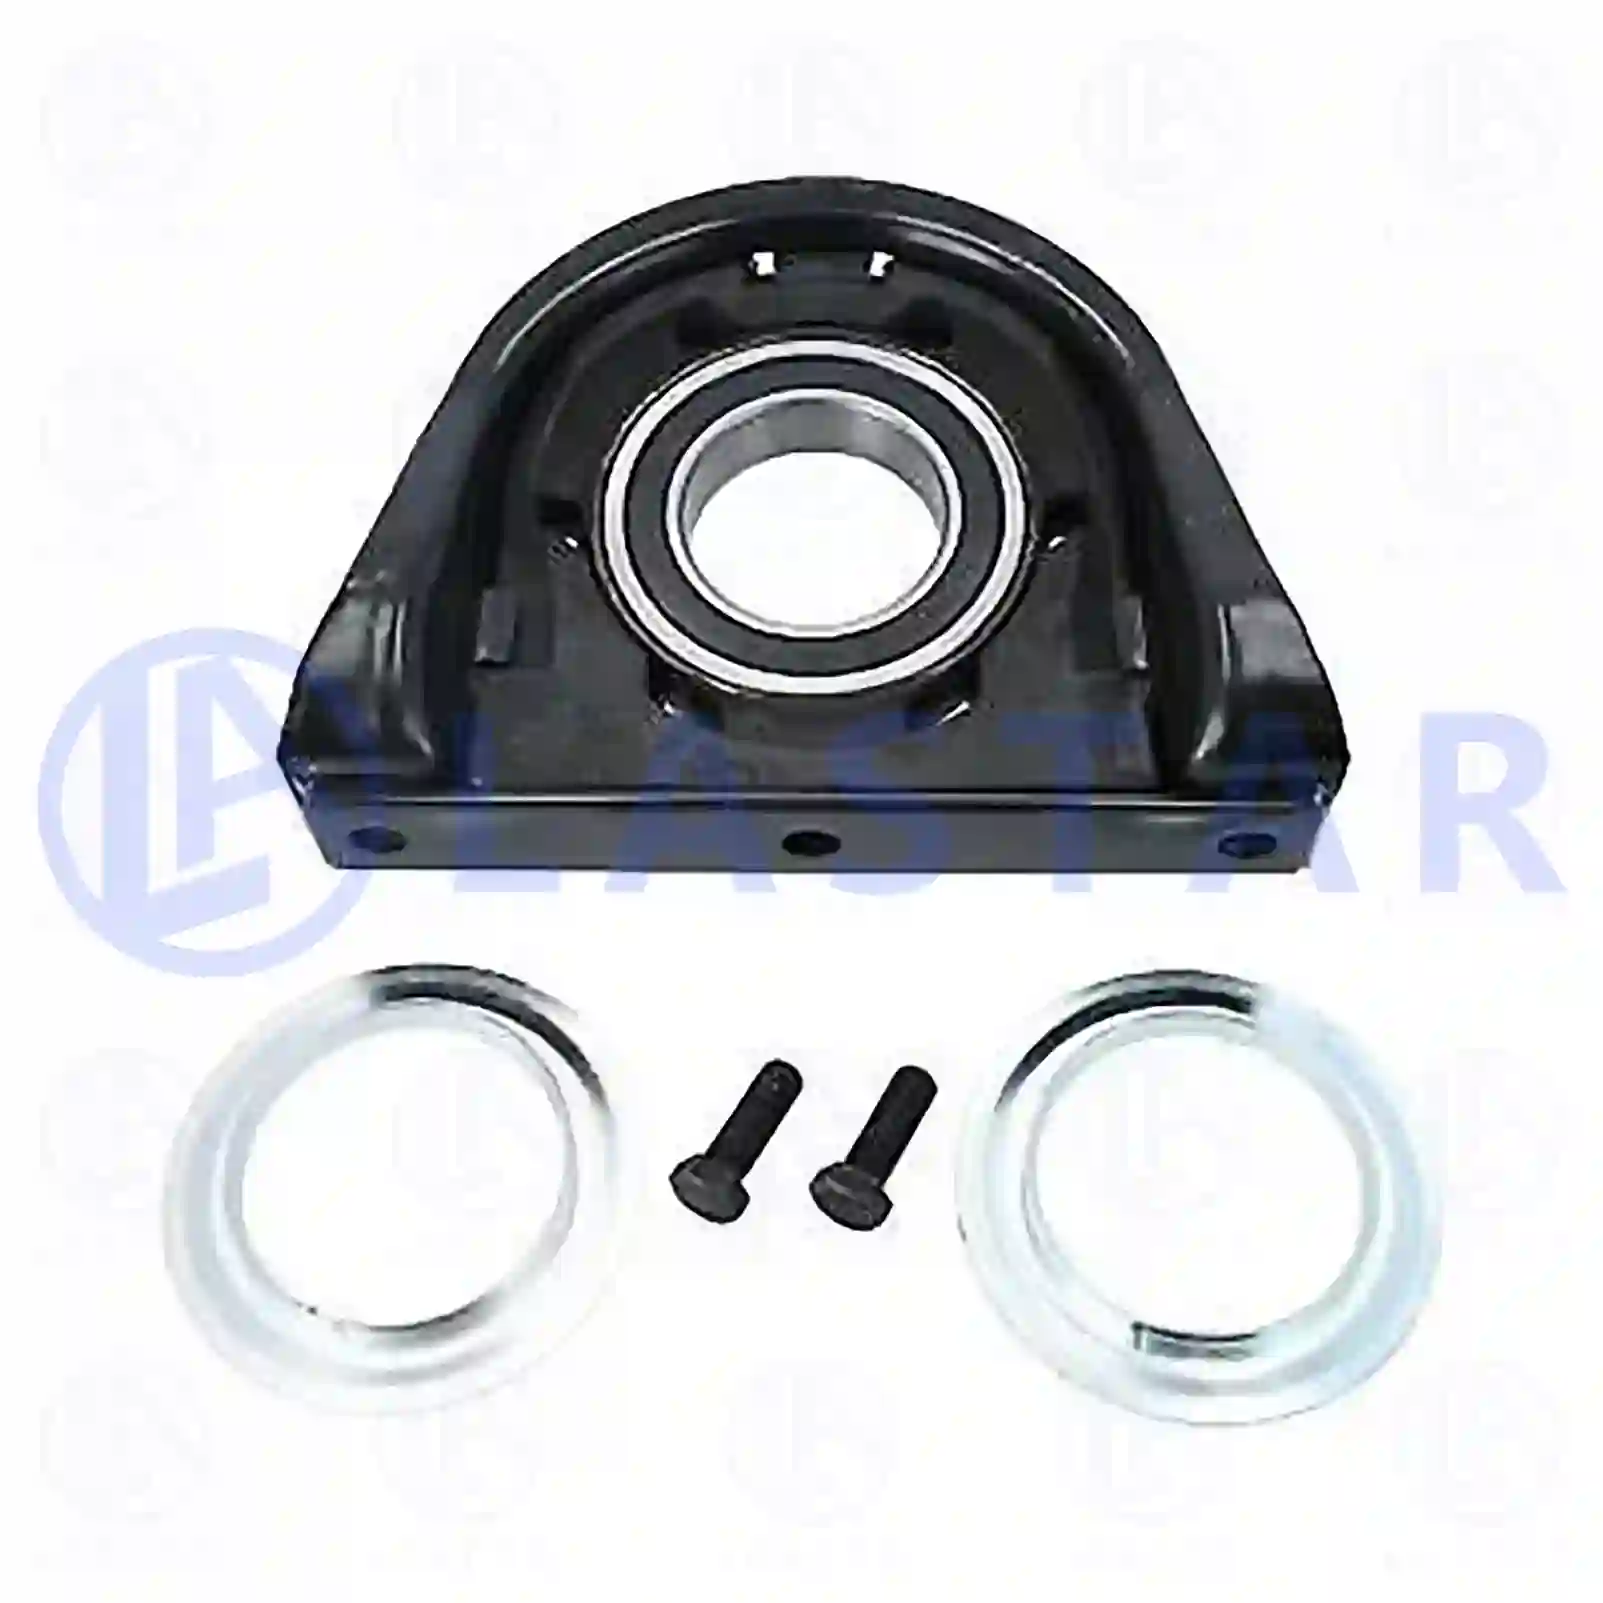 Center bearing, 77734128, 42564752 ||  77734128 Lastar Spare Part | Truck Spare Parts, Auotomotive Spare Parts Center bearing, 77734128, 42564752 ||  77734128 Lastar Spare Part | Truck Spare Parts, Auotomotive Spare Parts